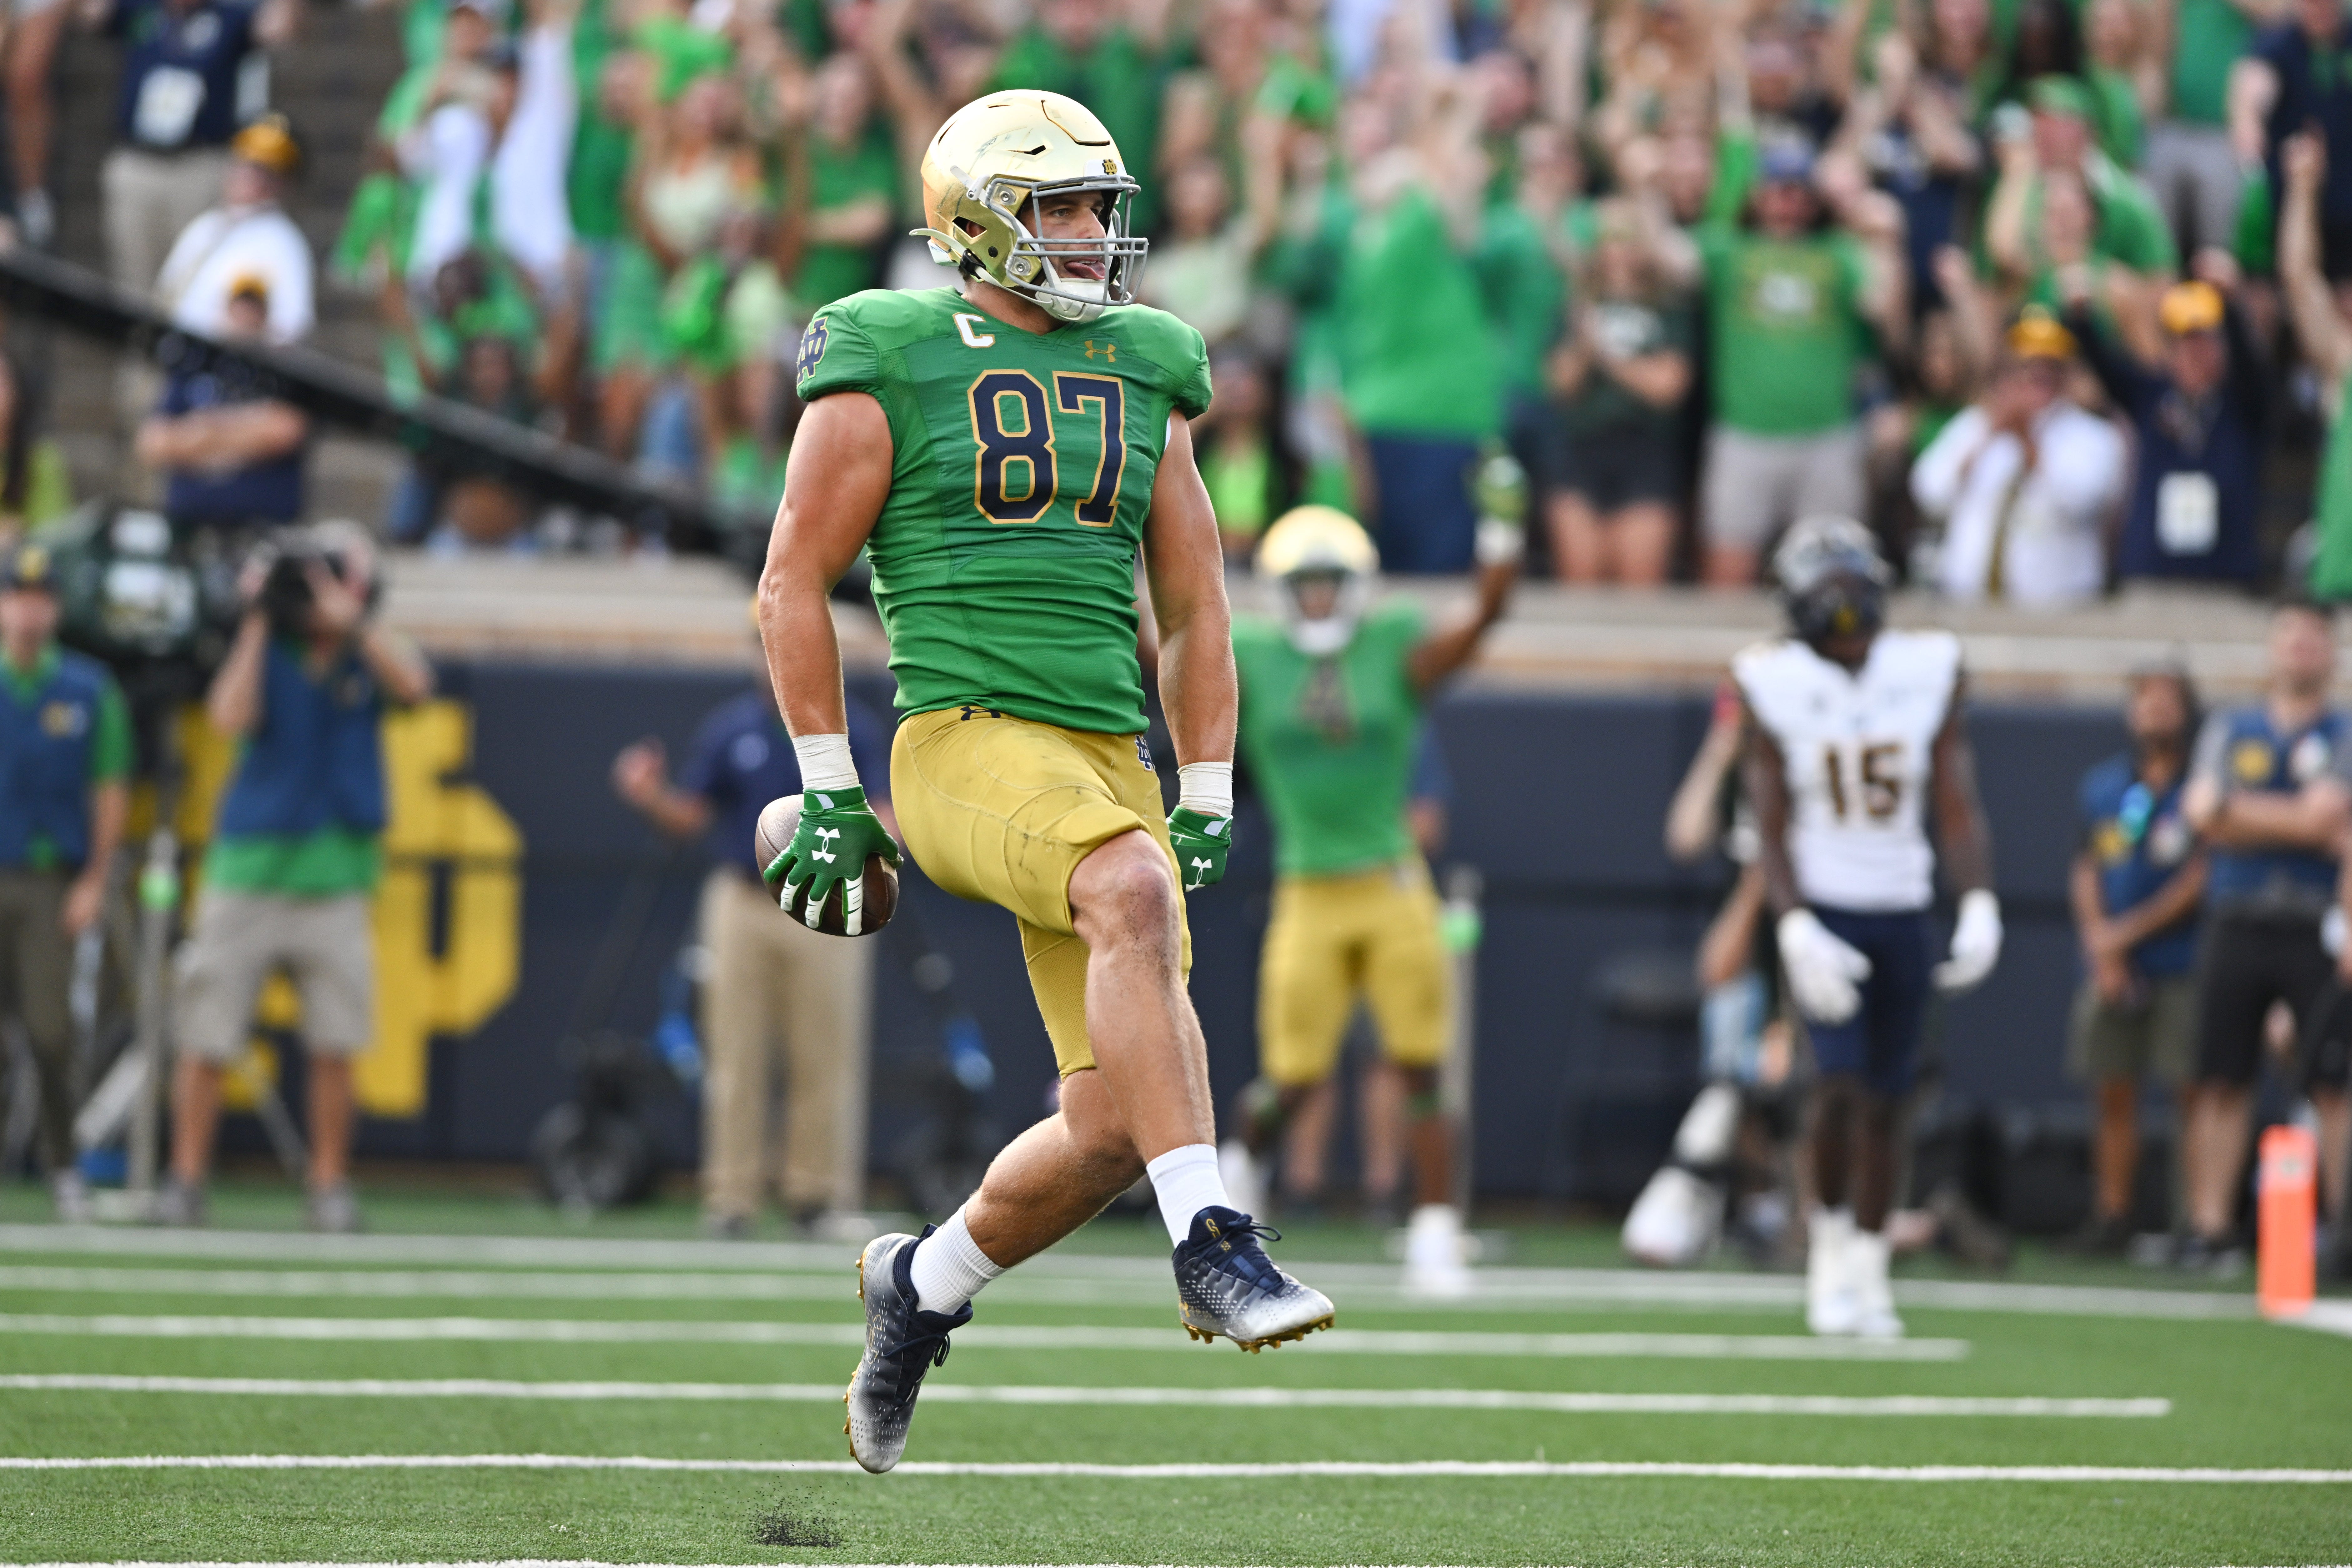 Sep 17, 2022; South Bend, Indiana, USA; Notre Dame Fighting Irish tight end Michael Mayer (87) celebrates after a touchdown in the fourth quarter against the California Bears at Notre Dame Stadium. Mandatory Credit: Matt Cashore-USA TODAY Sports